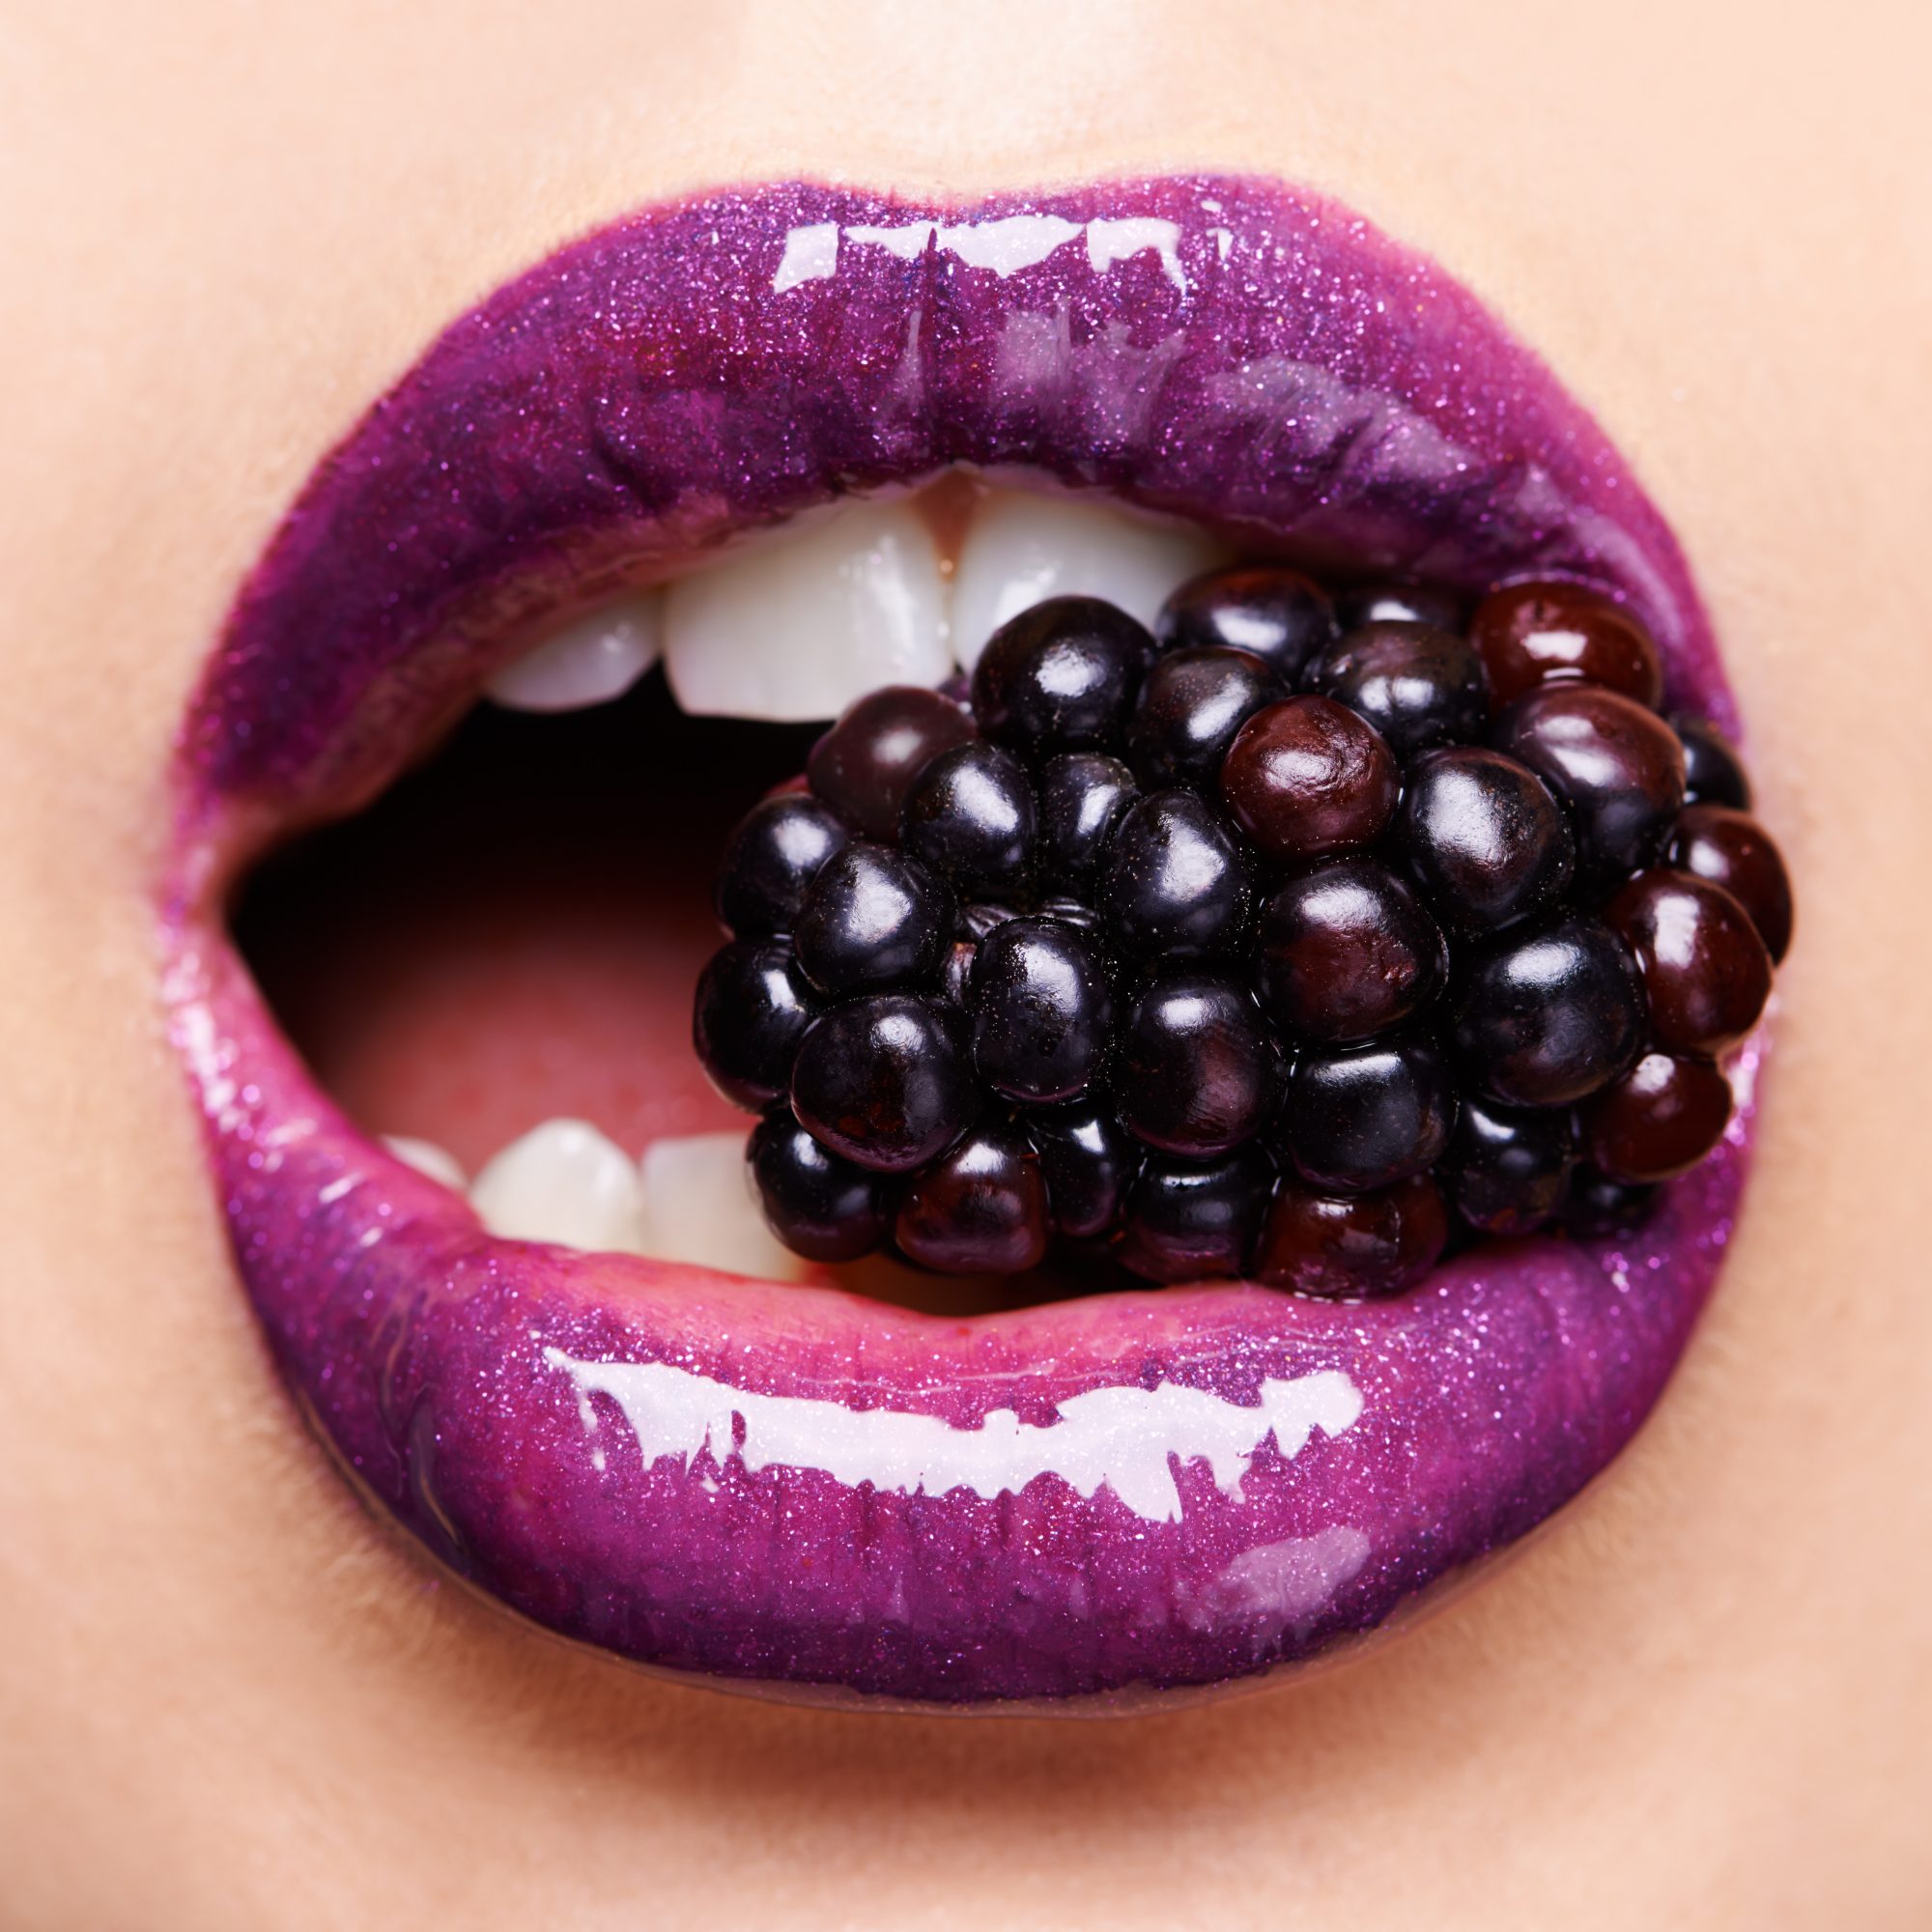 Shot of a woman wearing purple lipstick and biting into a blackberry